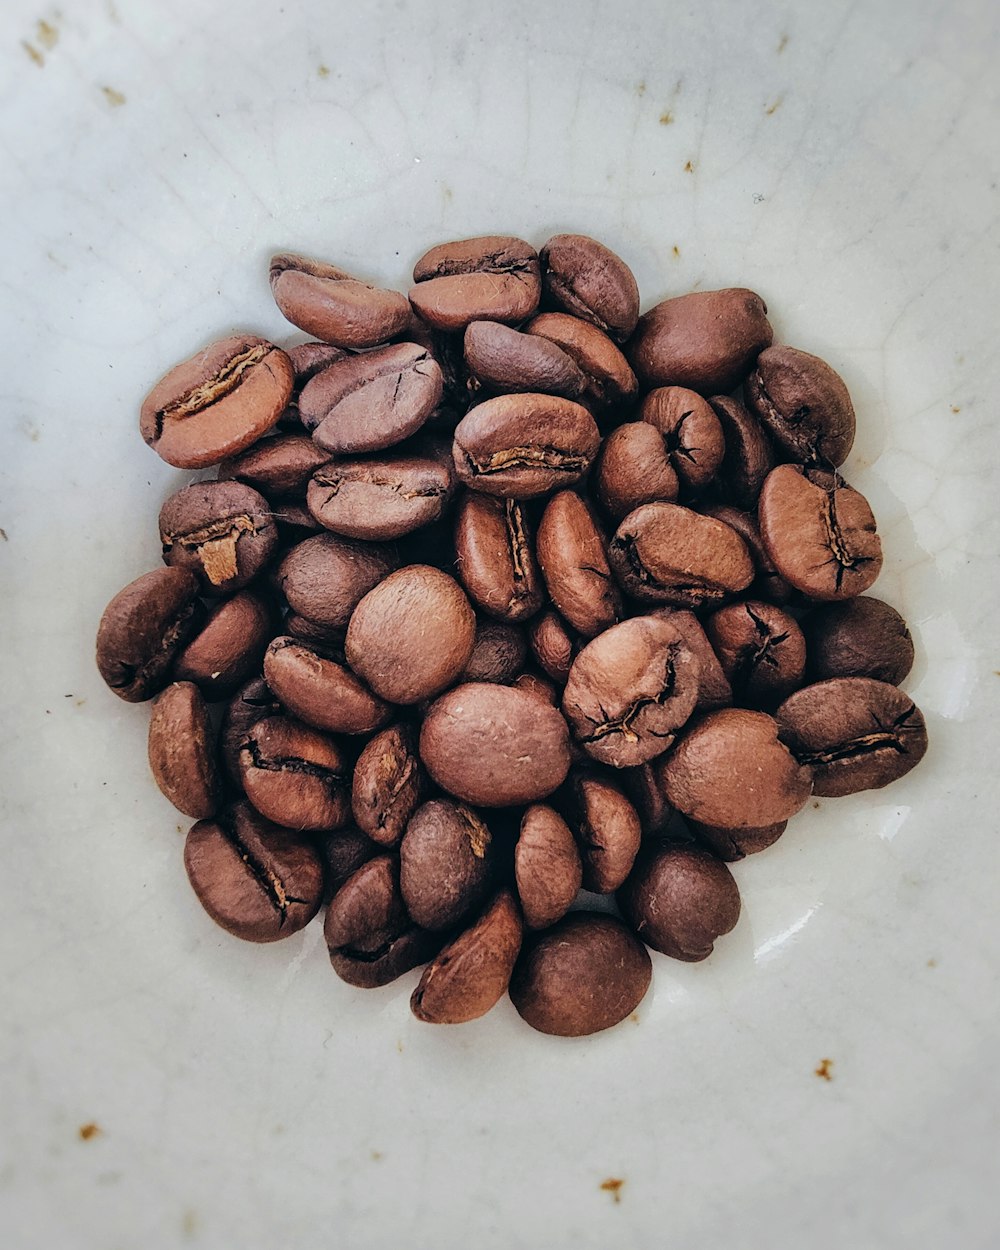 a pile of coffee beans in a white bowl